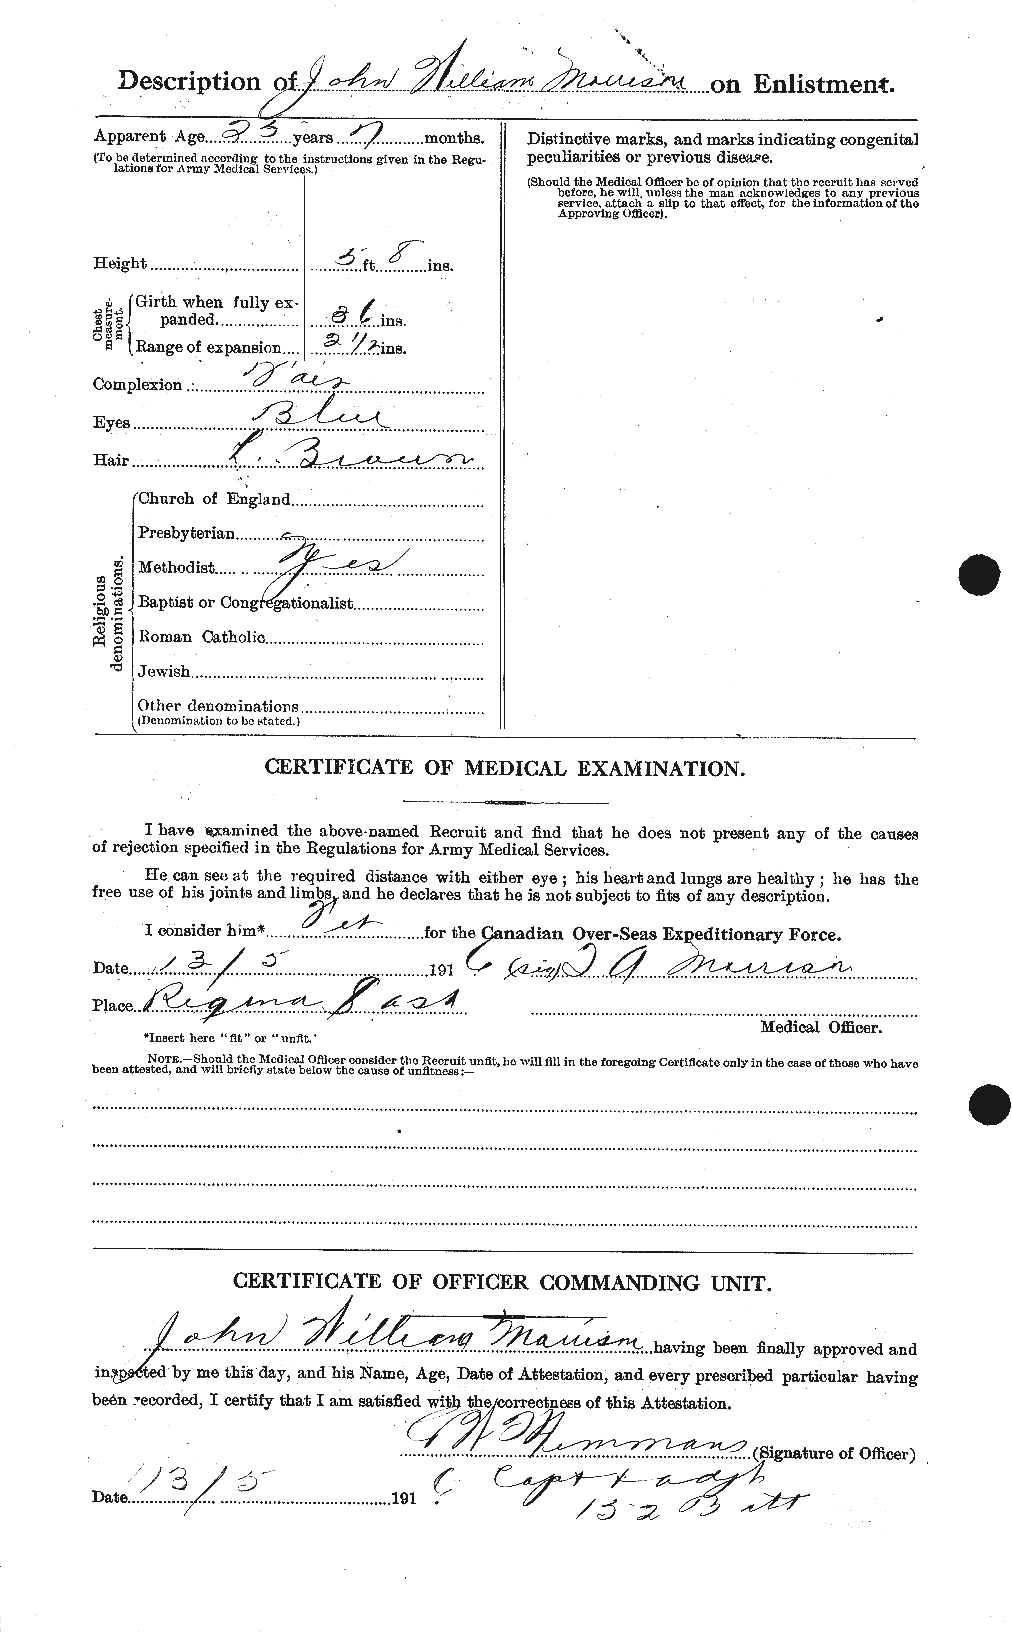 Personnel Records of the First World War - CEF 507080b